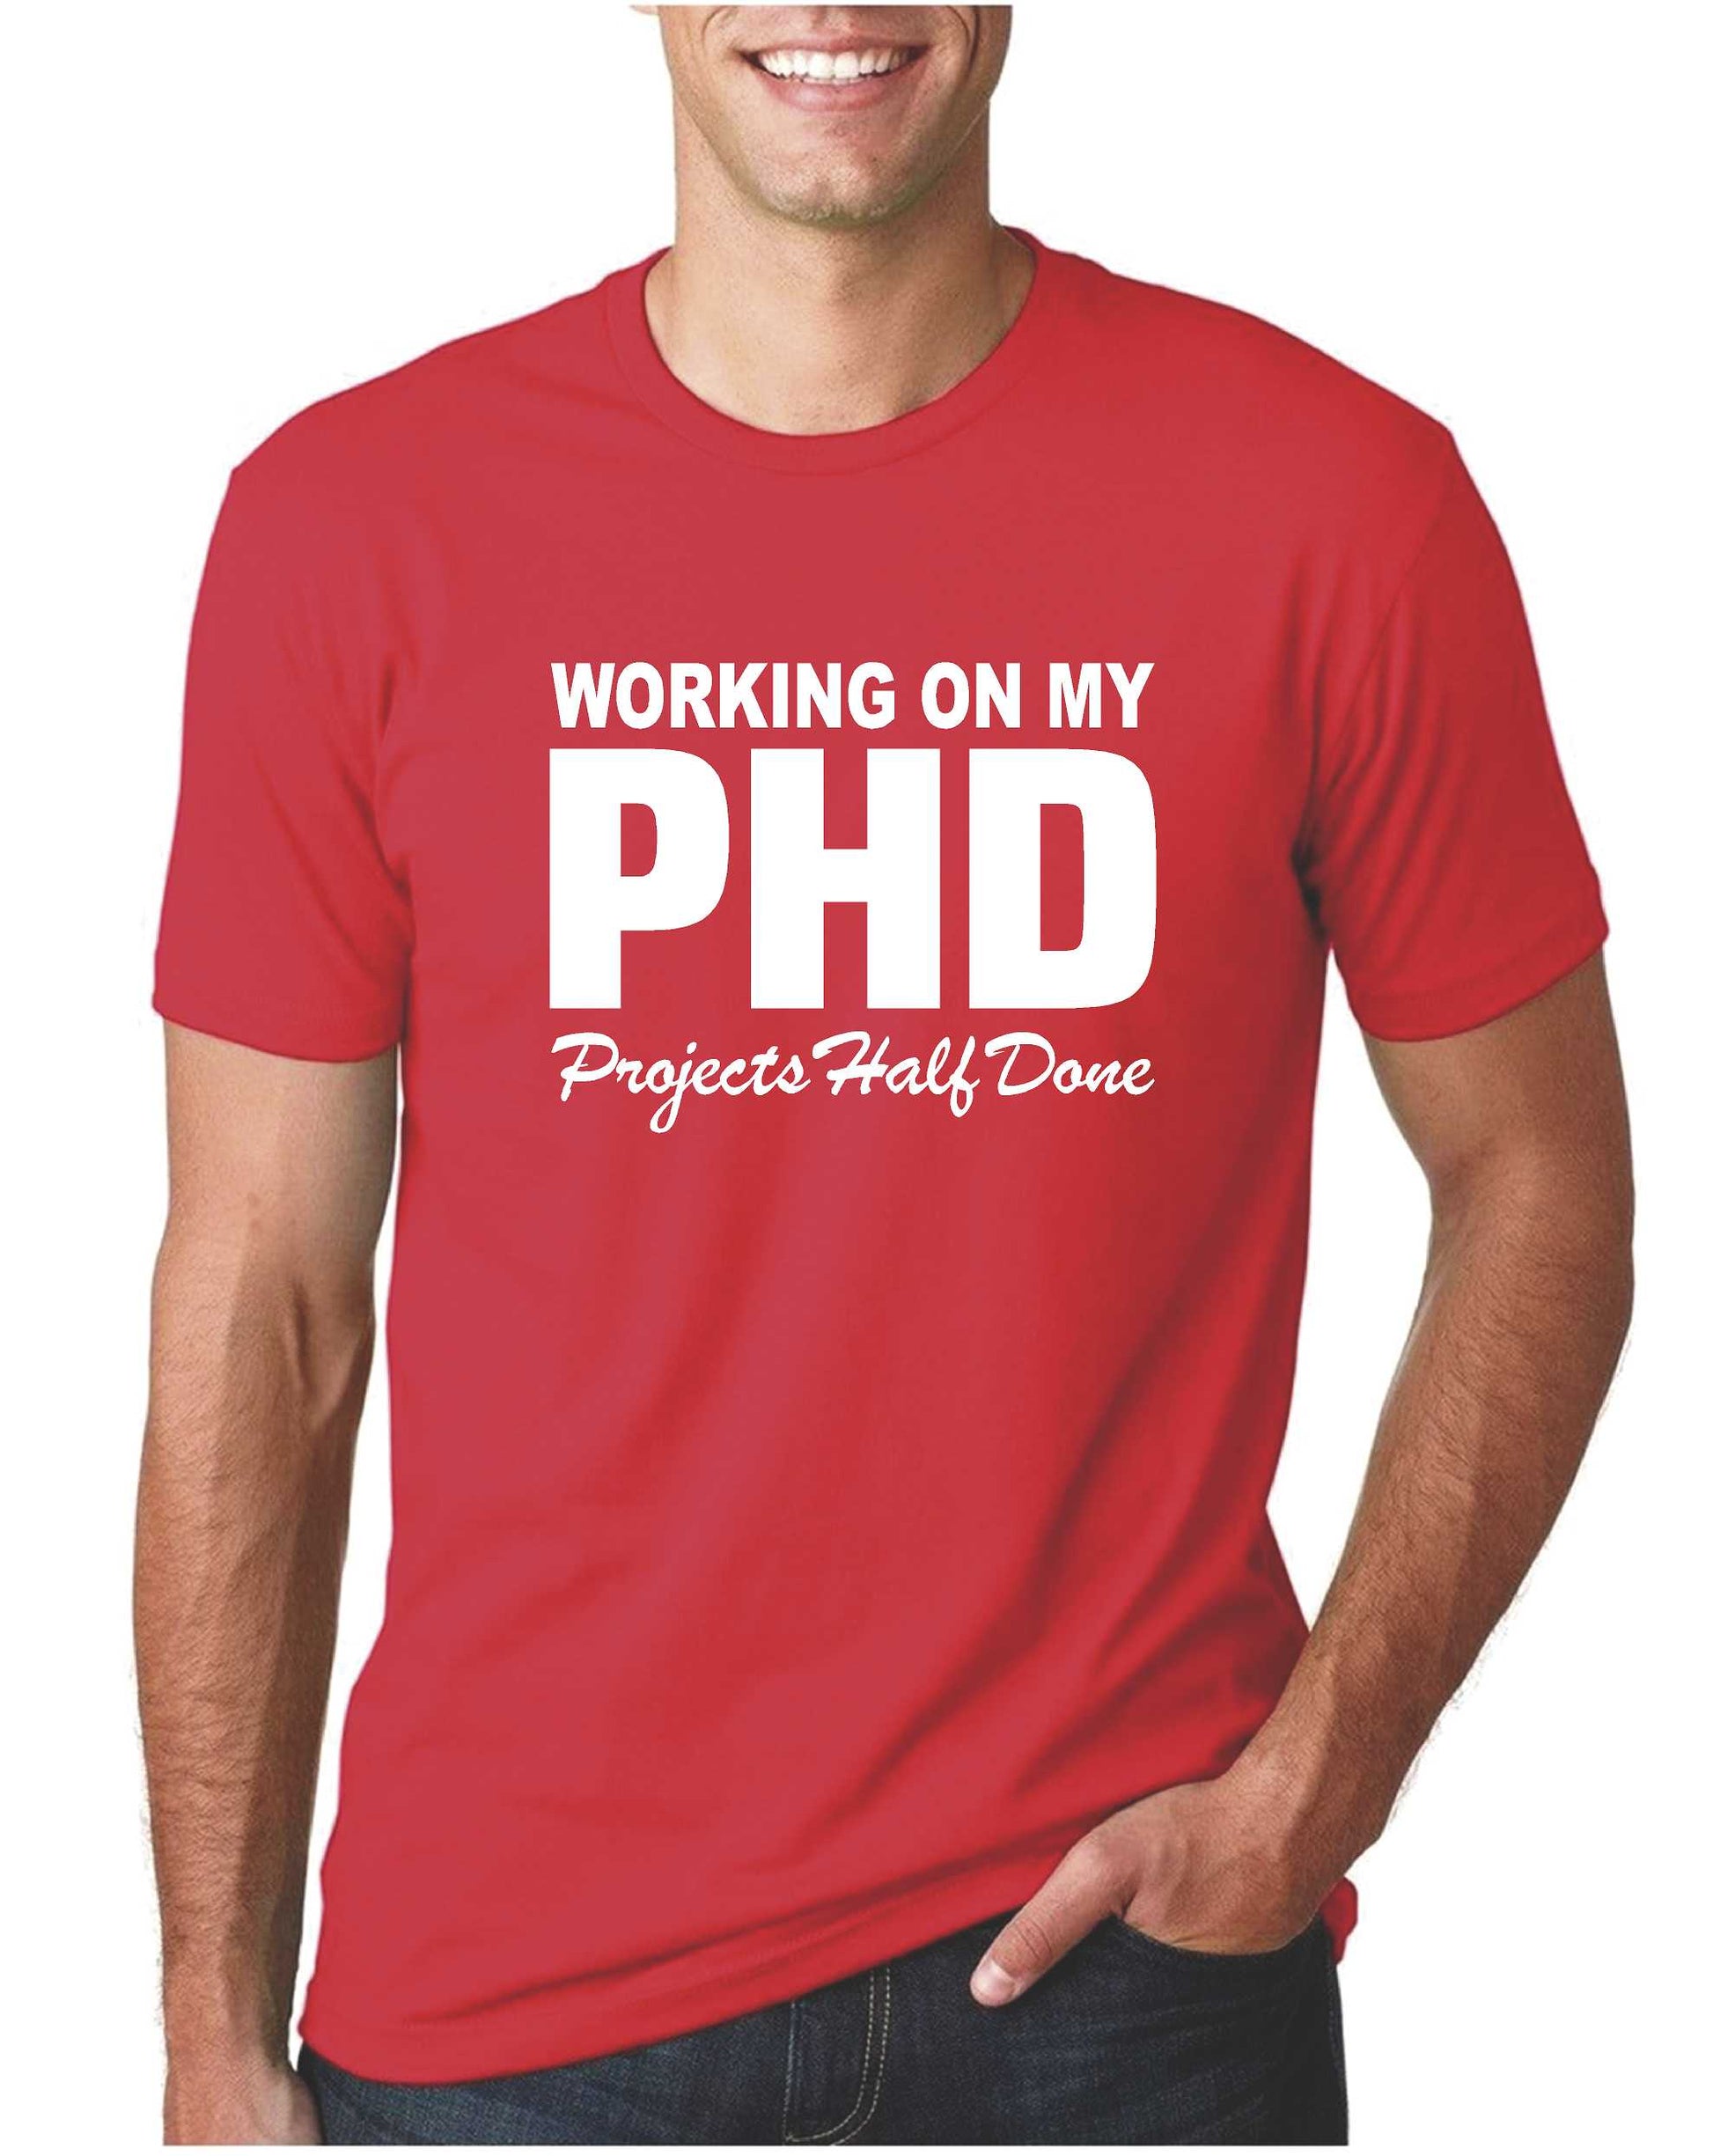 Mens Working On Phd Projects Half Done Funny T-Shirt – Our T Shirt Shack